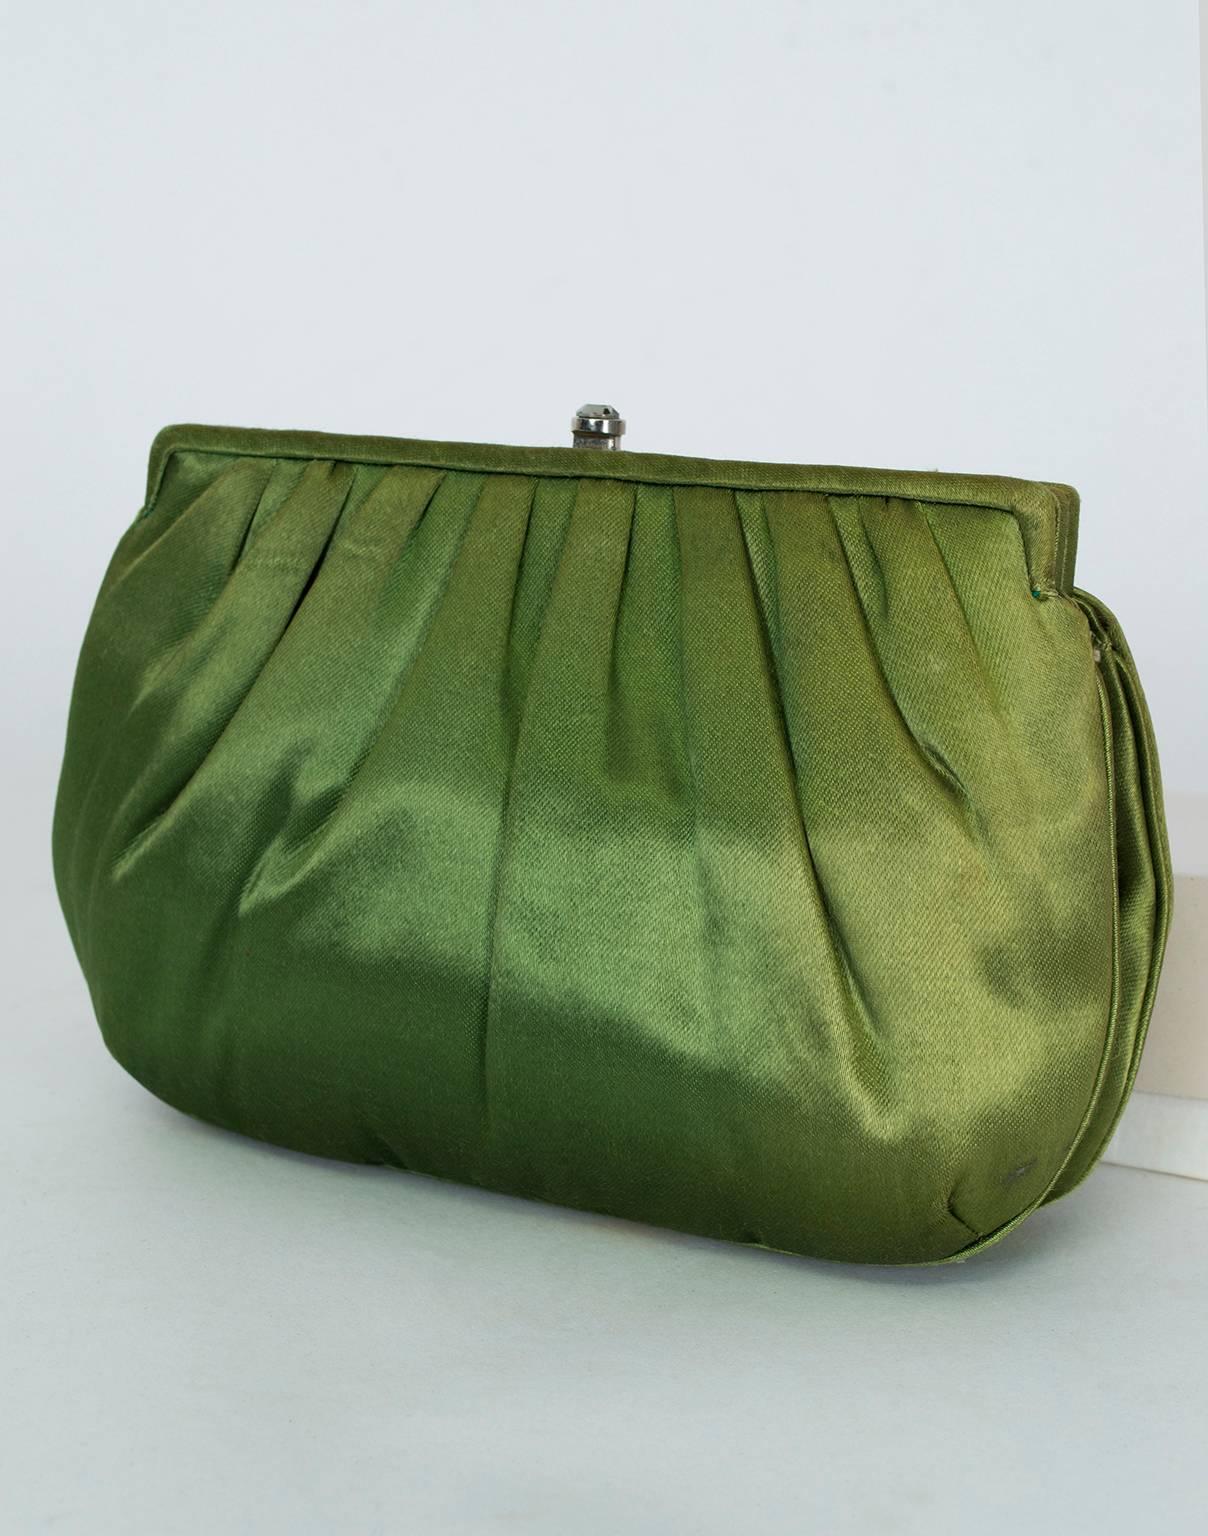 For those who feel more comfortable at a whisper than a shout, this evening bag brings a little less bling than the pavé crystal minaudières that made Judith Leiber famous, but still packs a wallop thanks to its Jadeite and crystal top frame. Best